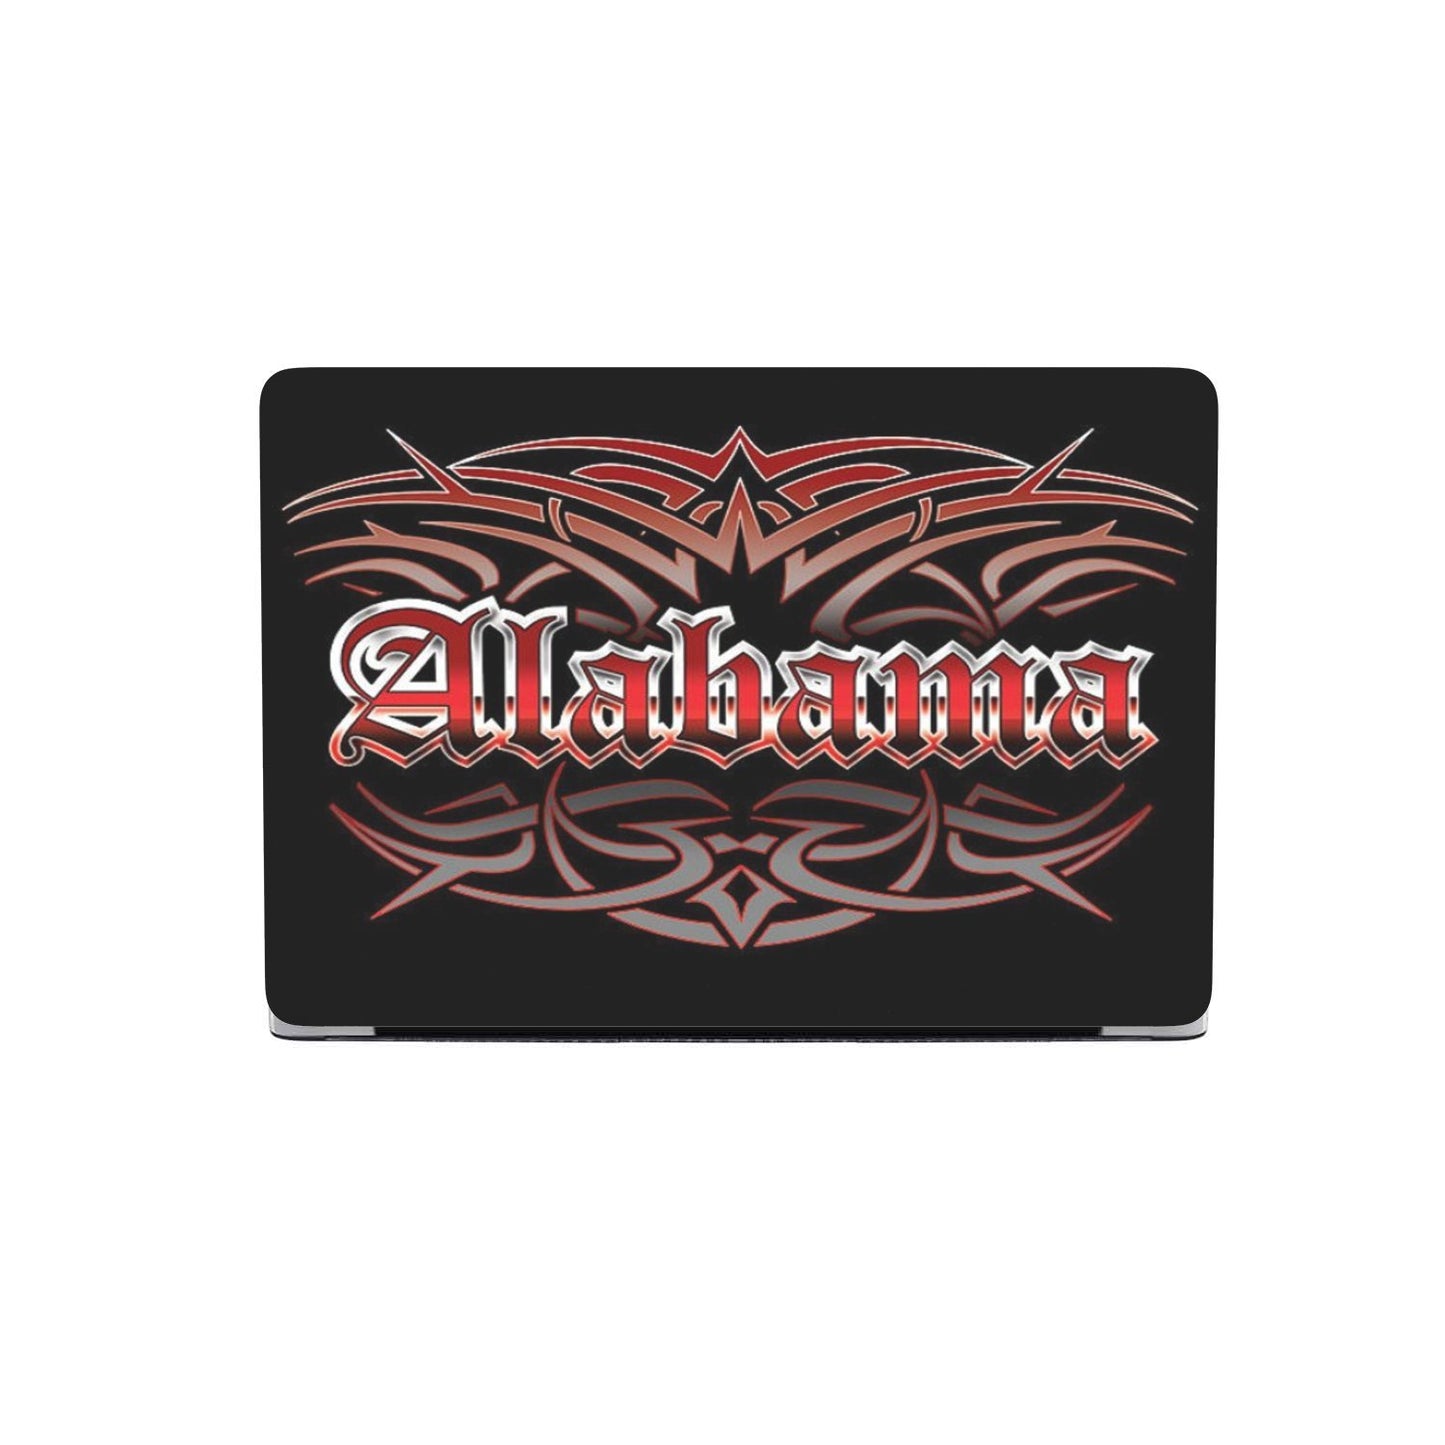 Alabama Team Custom MacBook Case by Woody Signs Co. - Handmade Crafted Unique Wooden Creative